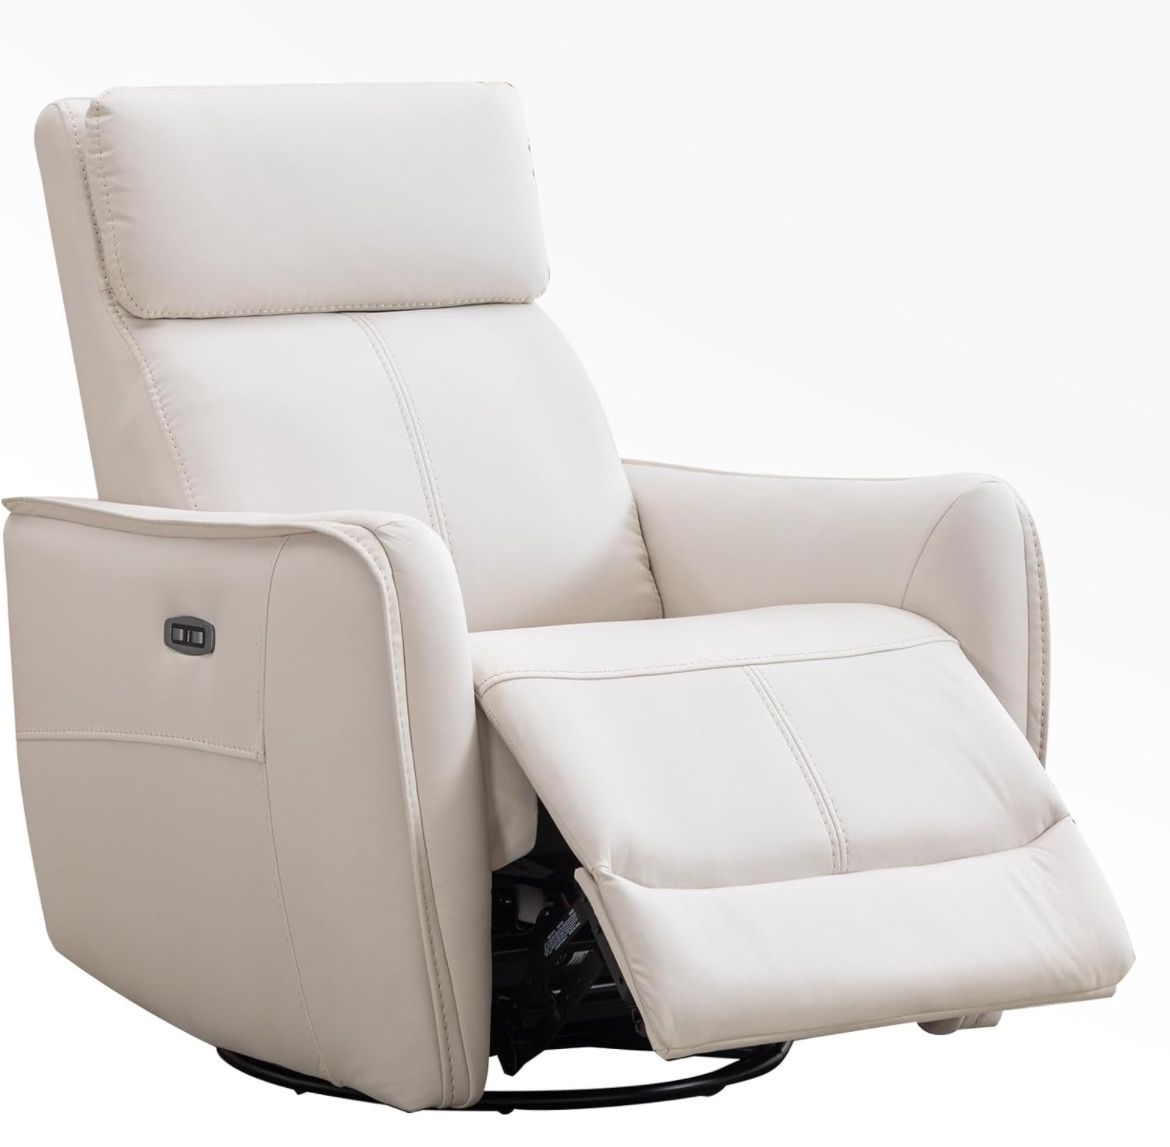 Power Swivel Rocker Recliner Chair, Electric Glider Reclining Sofa with USB Port, Leathaire Rocking Chair Nursery Recliners for Living Room (Cream Whi